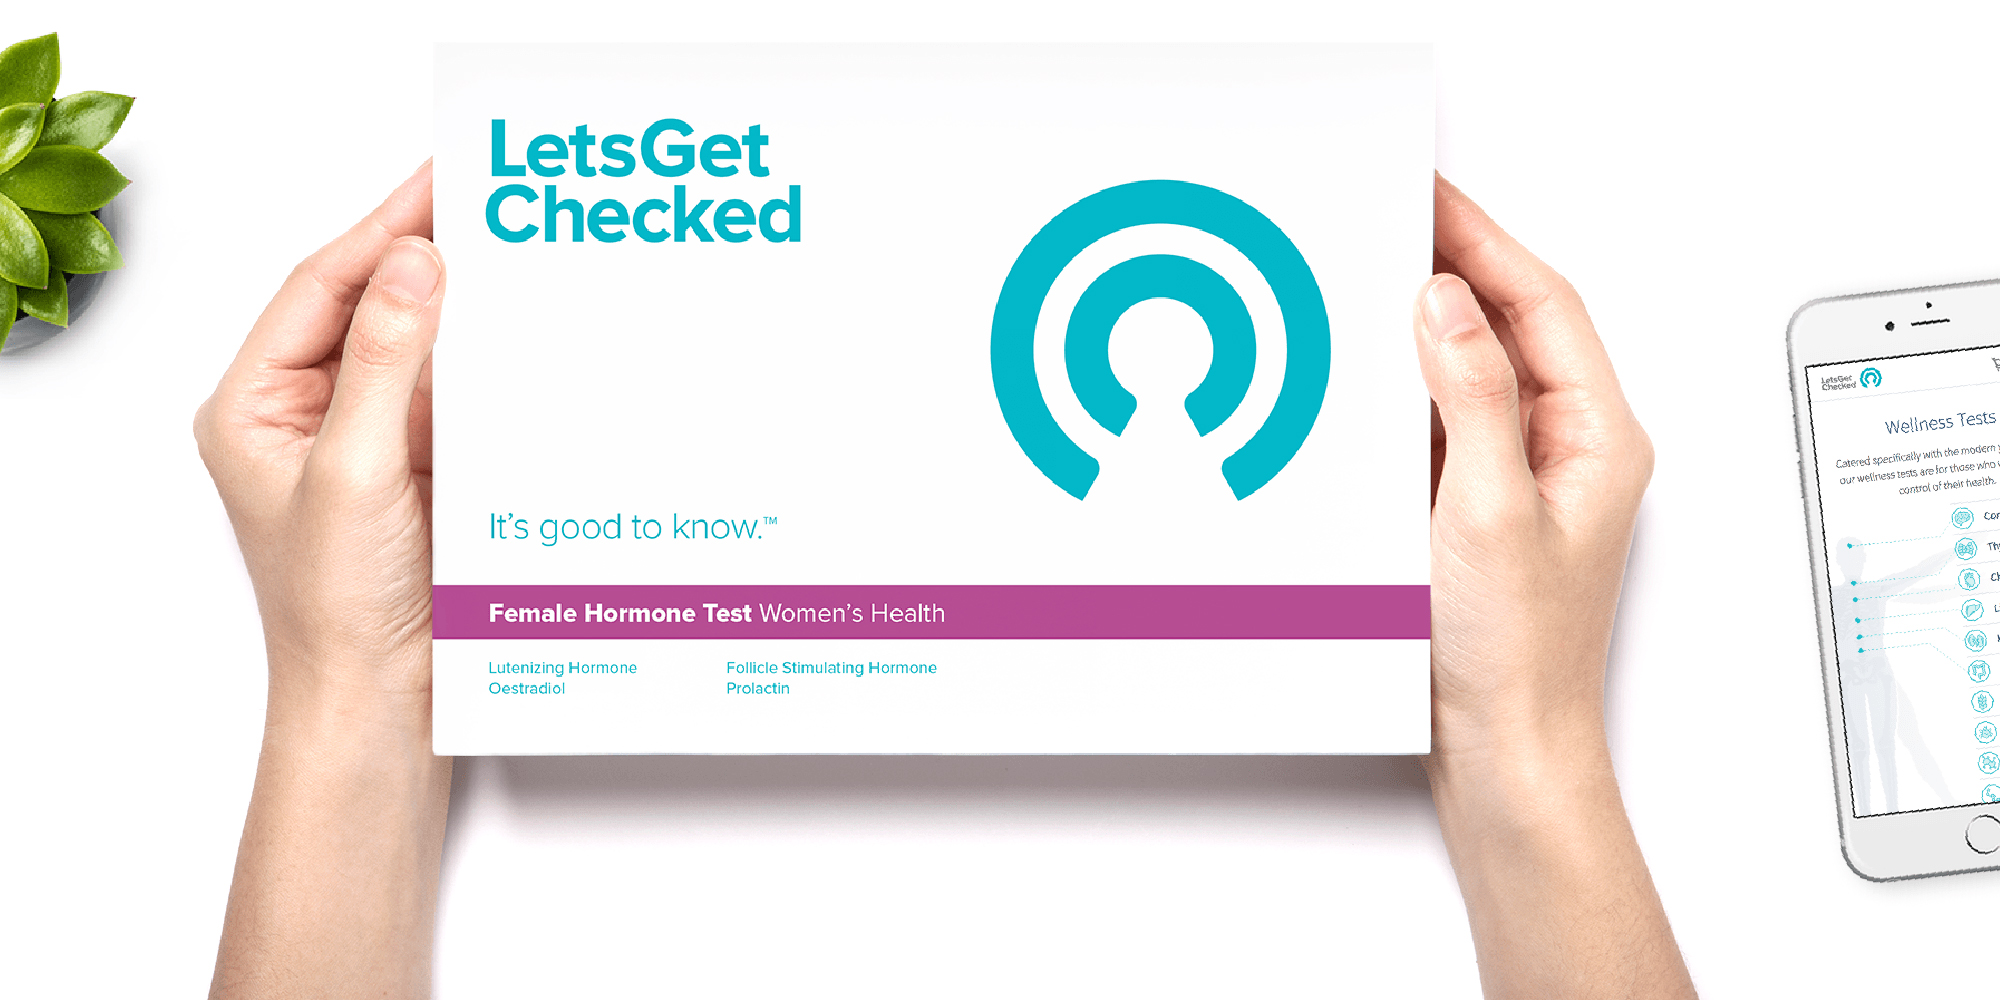 A home fertility test kit for those trying to conceive